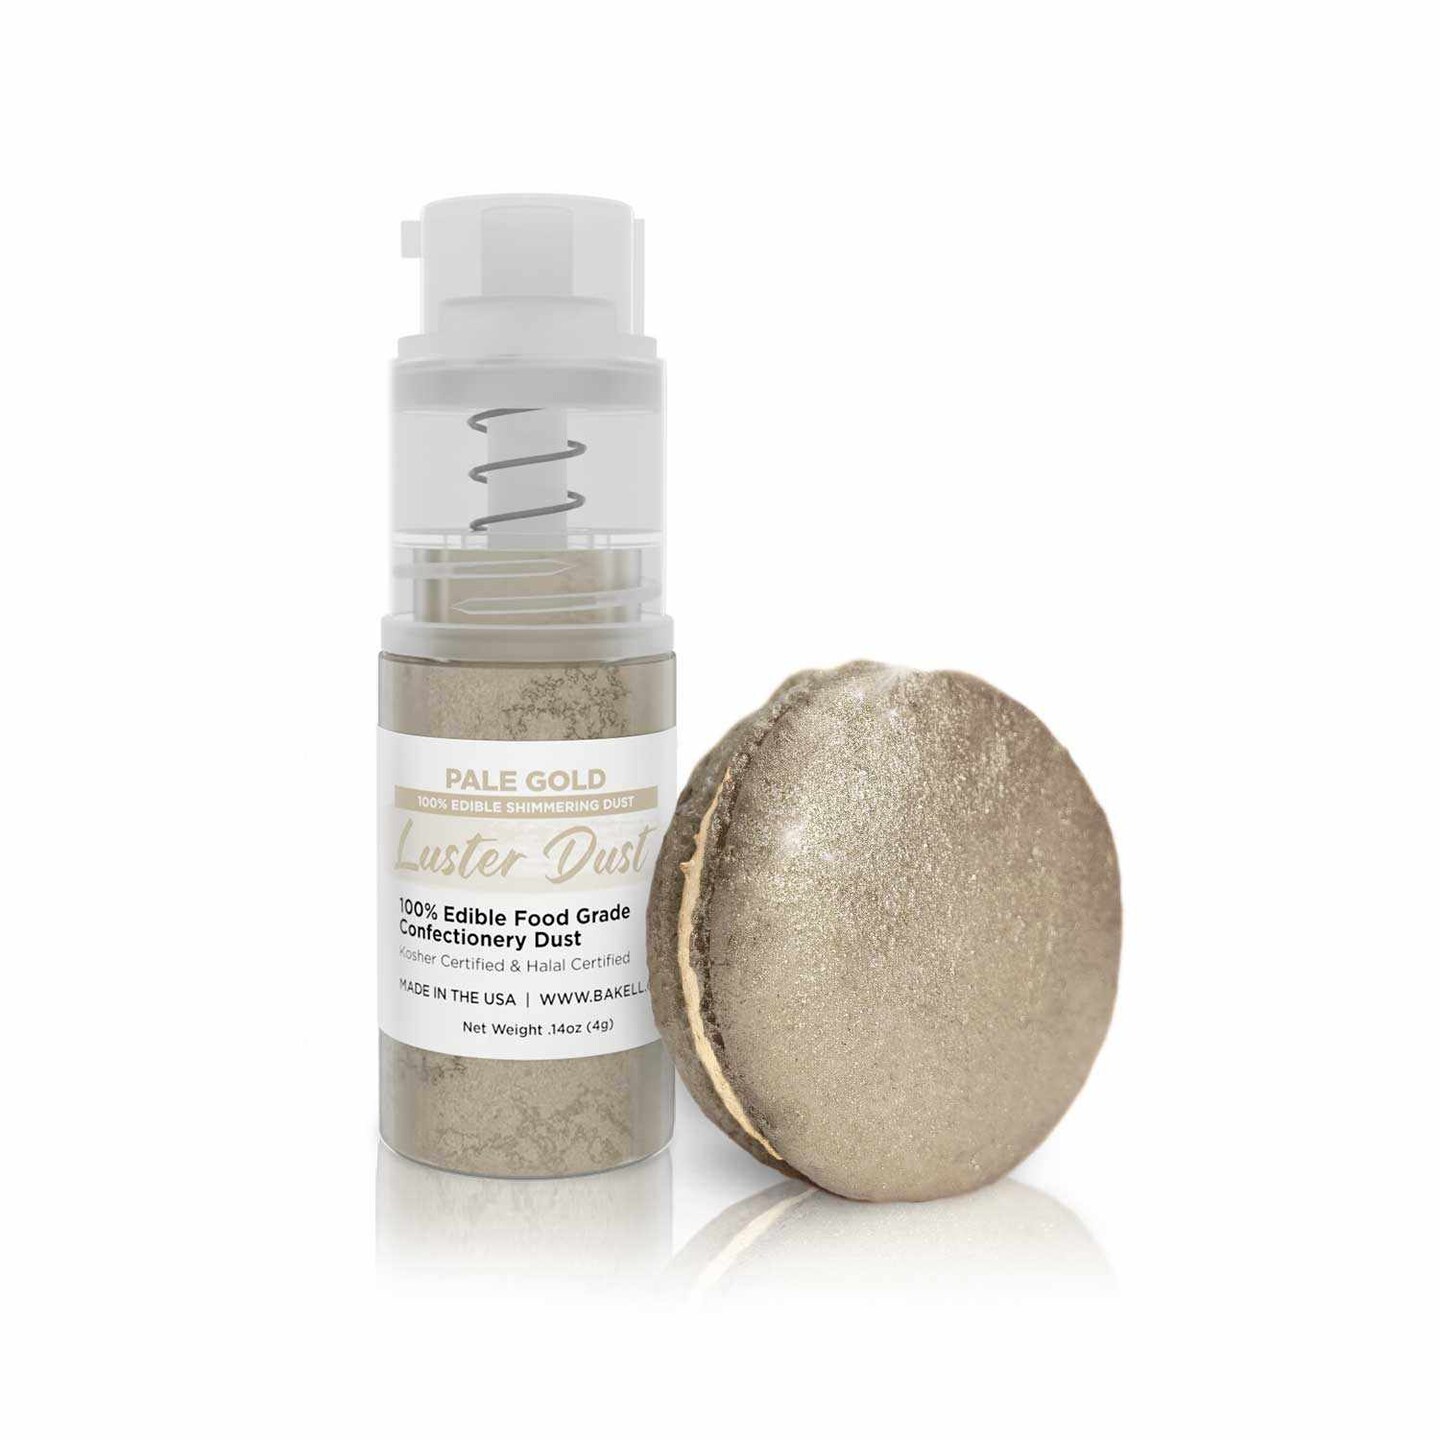 Pale Gold Luster Dust Spray | Luster Dust Edible Glitter Spray Dust for Cakes, Cookies, Desserts, Paint. FDA Compliant (4 Gram Pump)